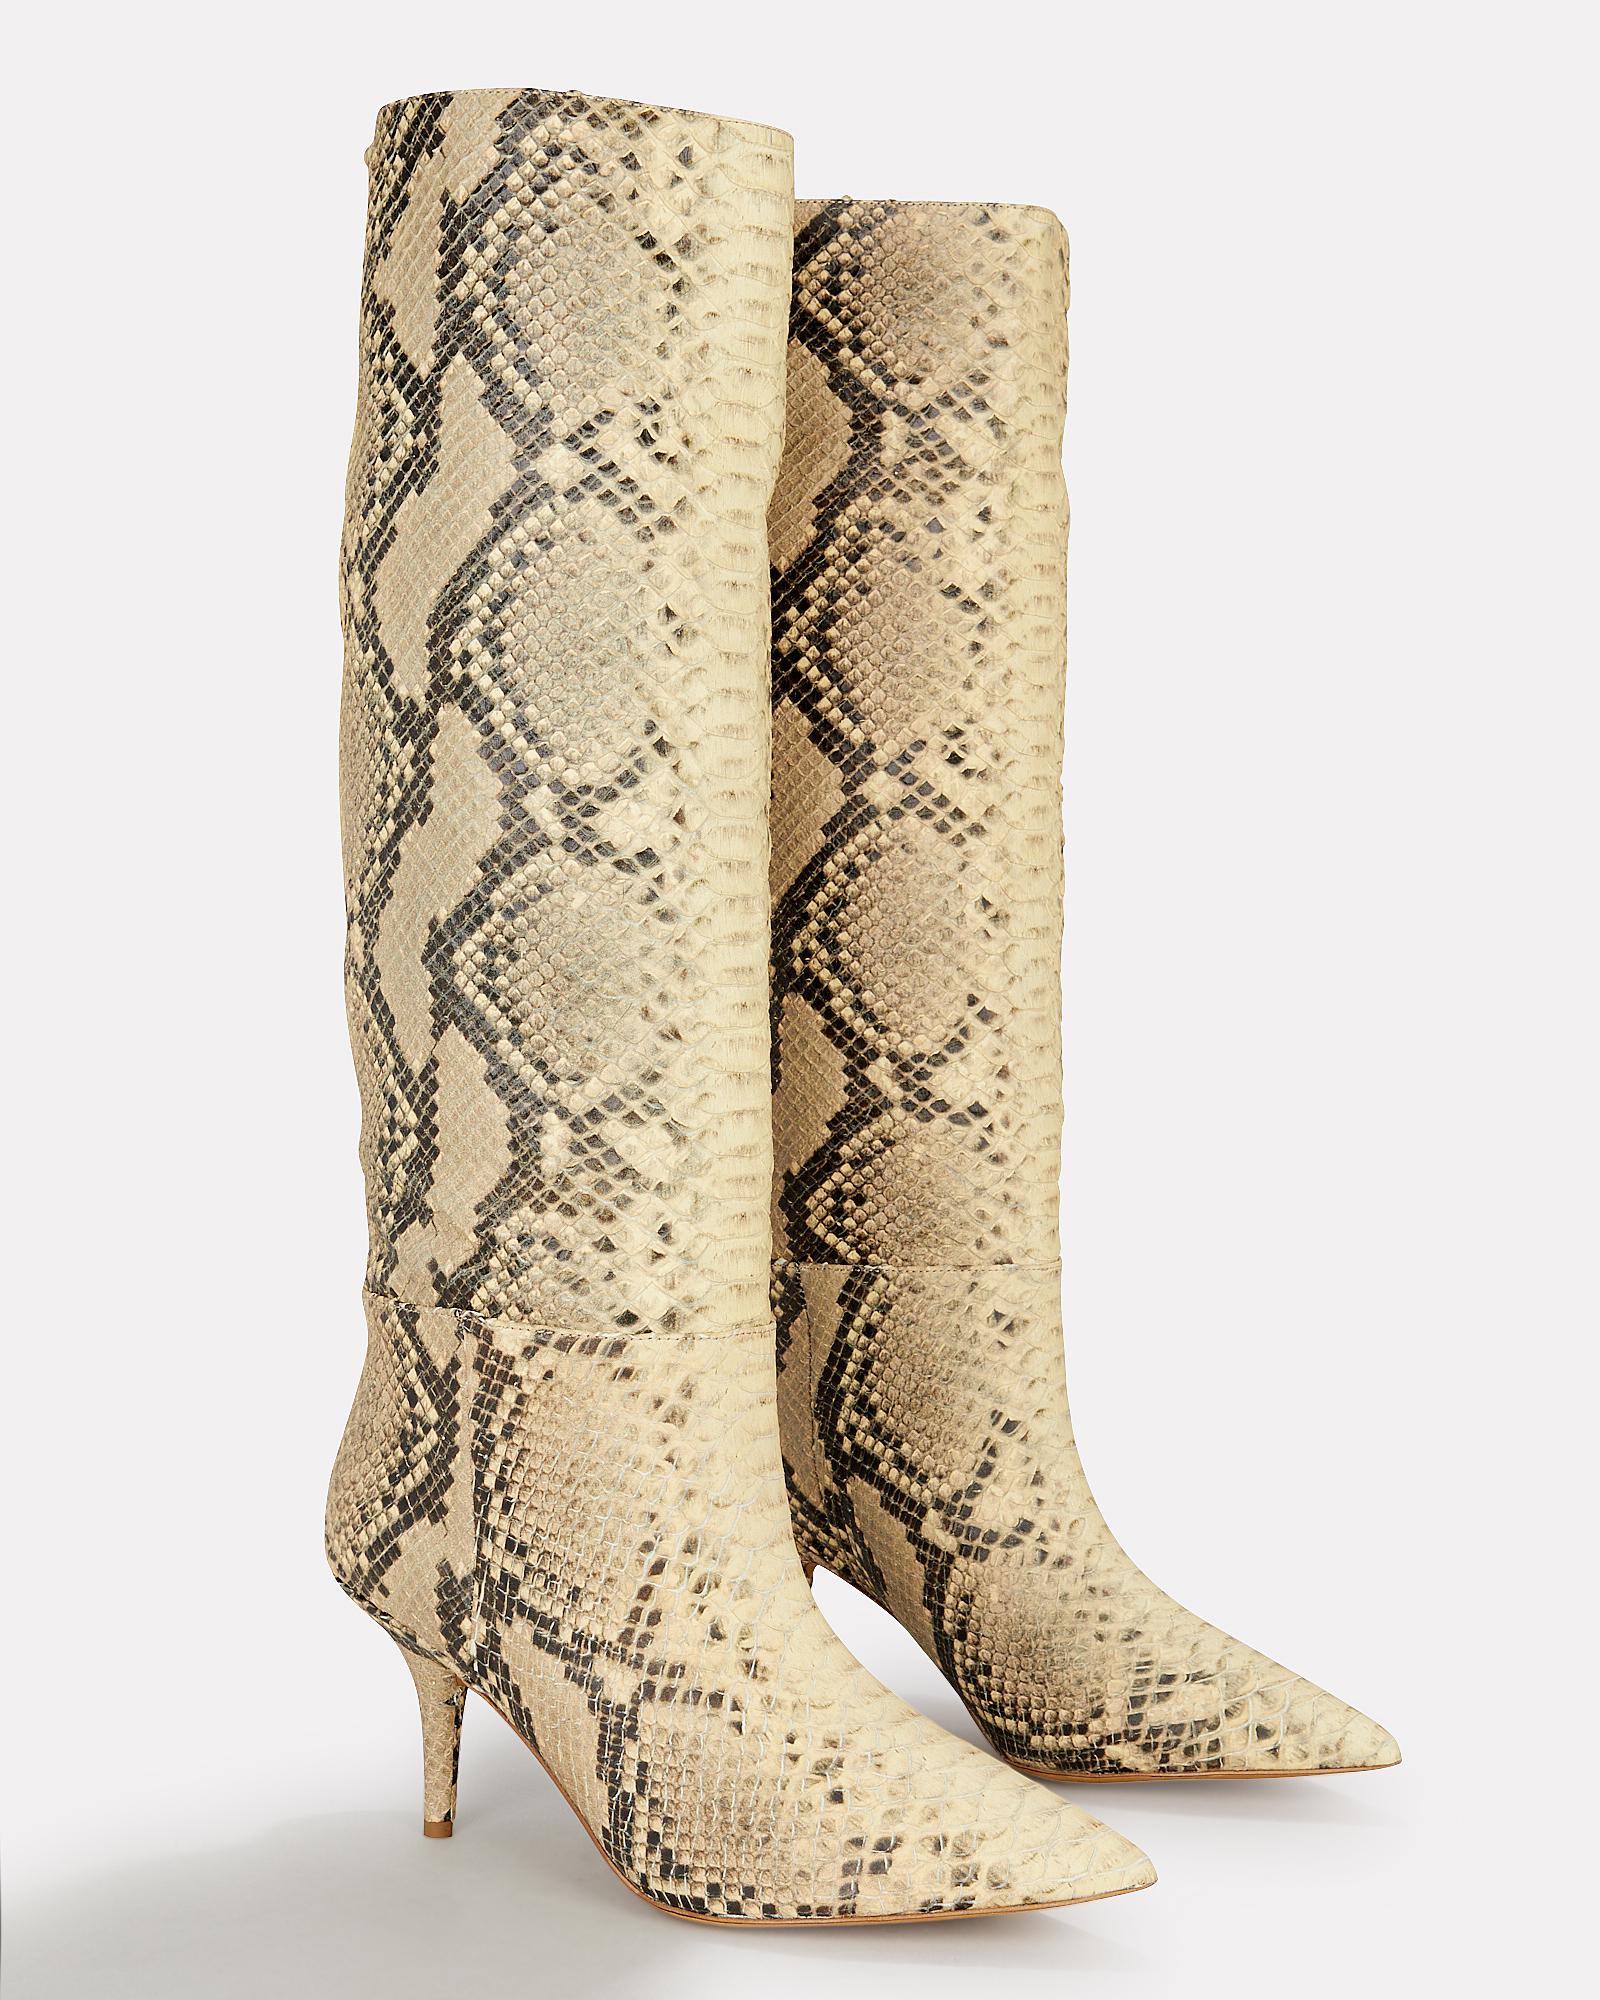 Snakeskin Yeezy Boots Deals, 55% OFF | www.smokymountains.org